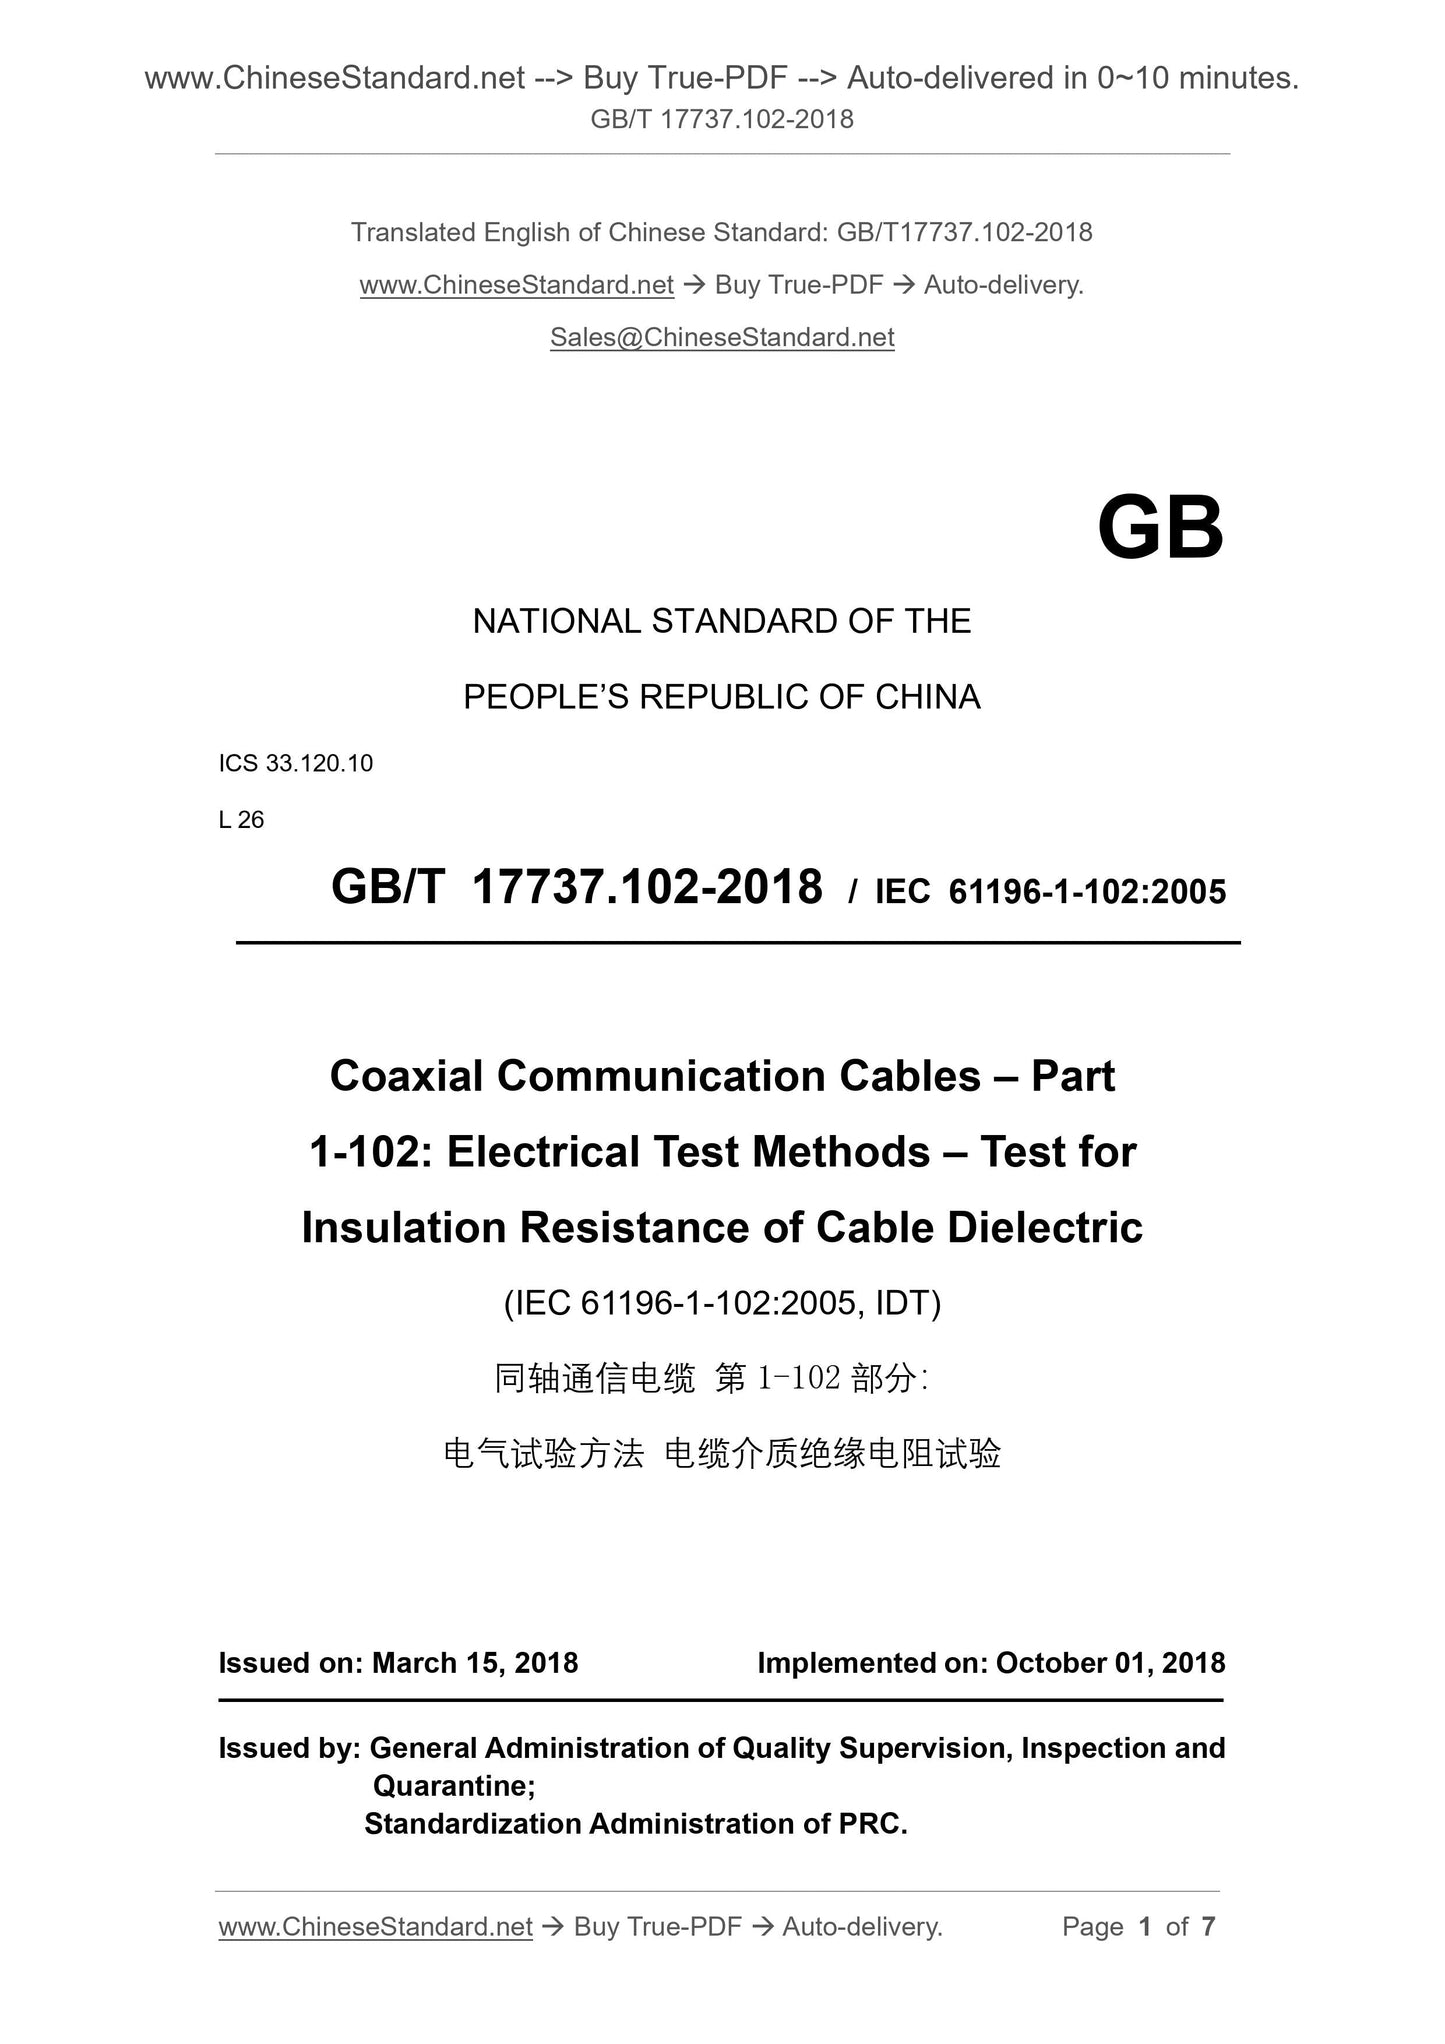 GB/T 17737.102-2018 Page 1